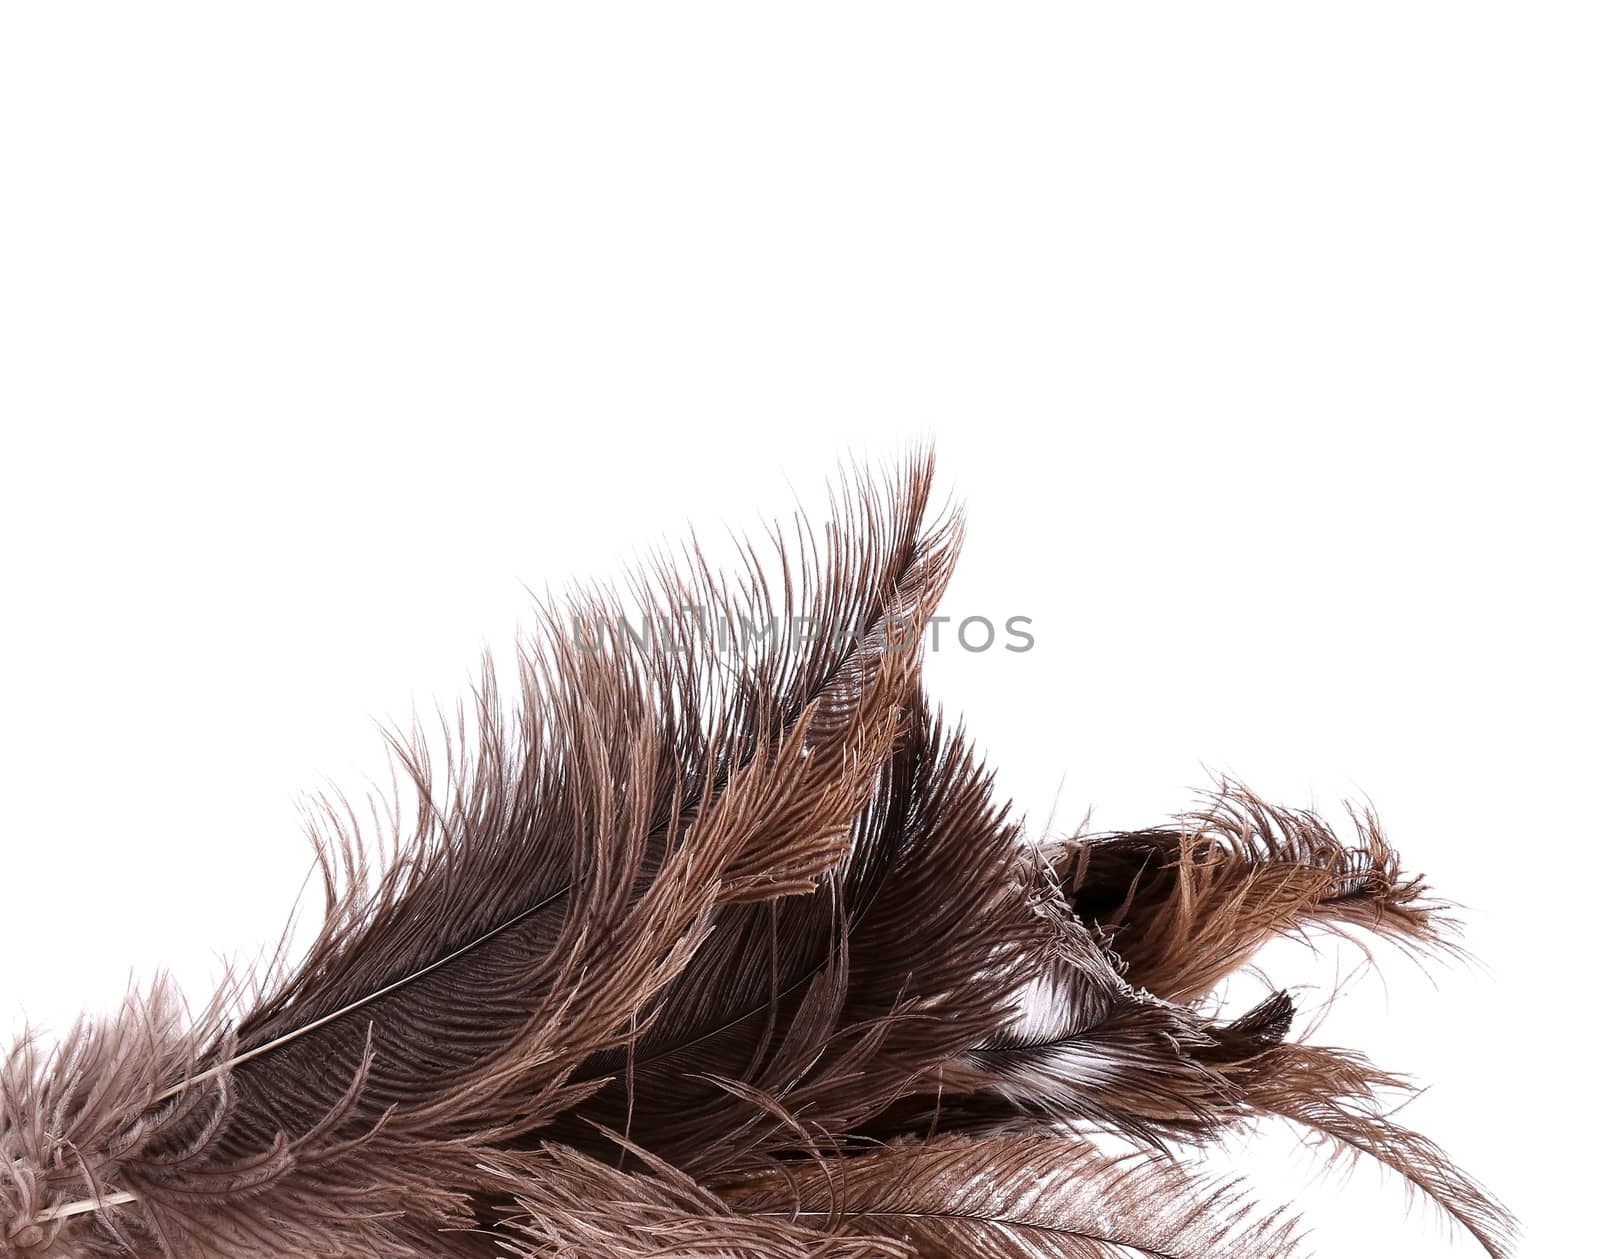 Brush ostrich feather close-up on the white background